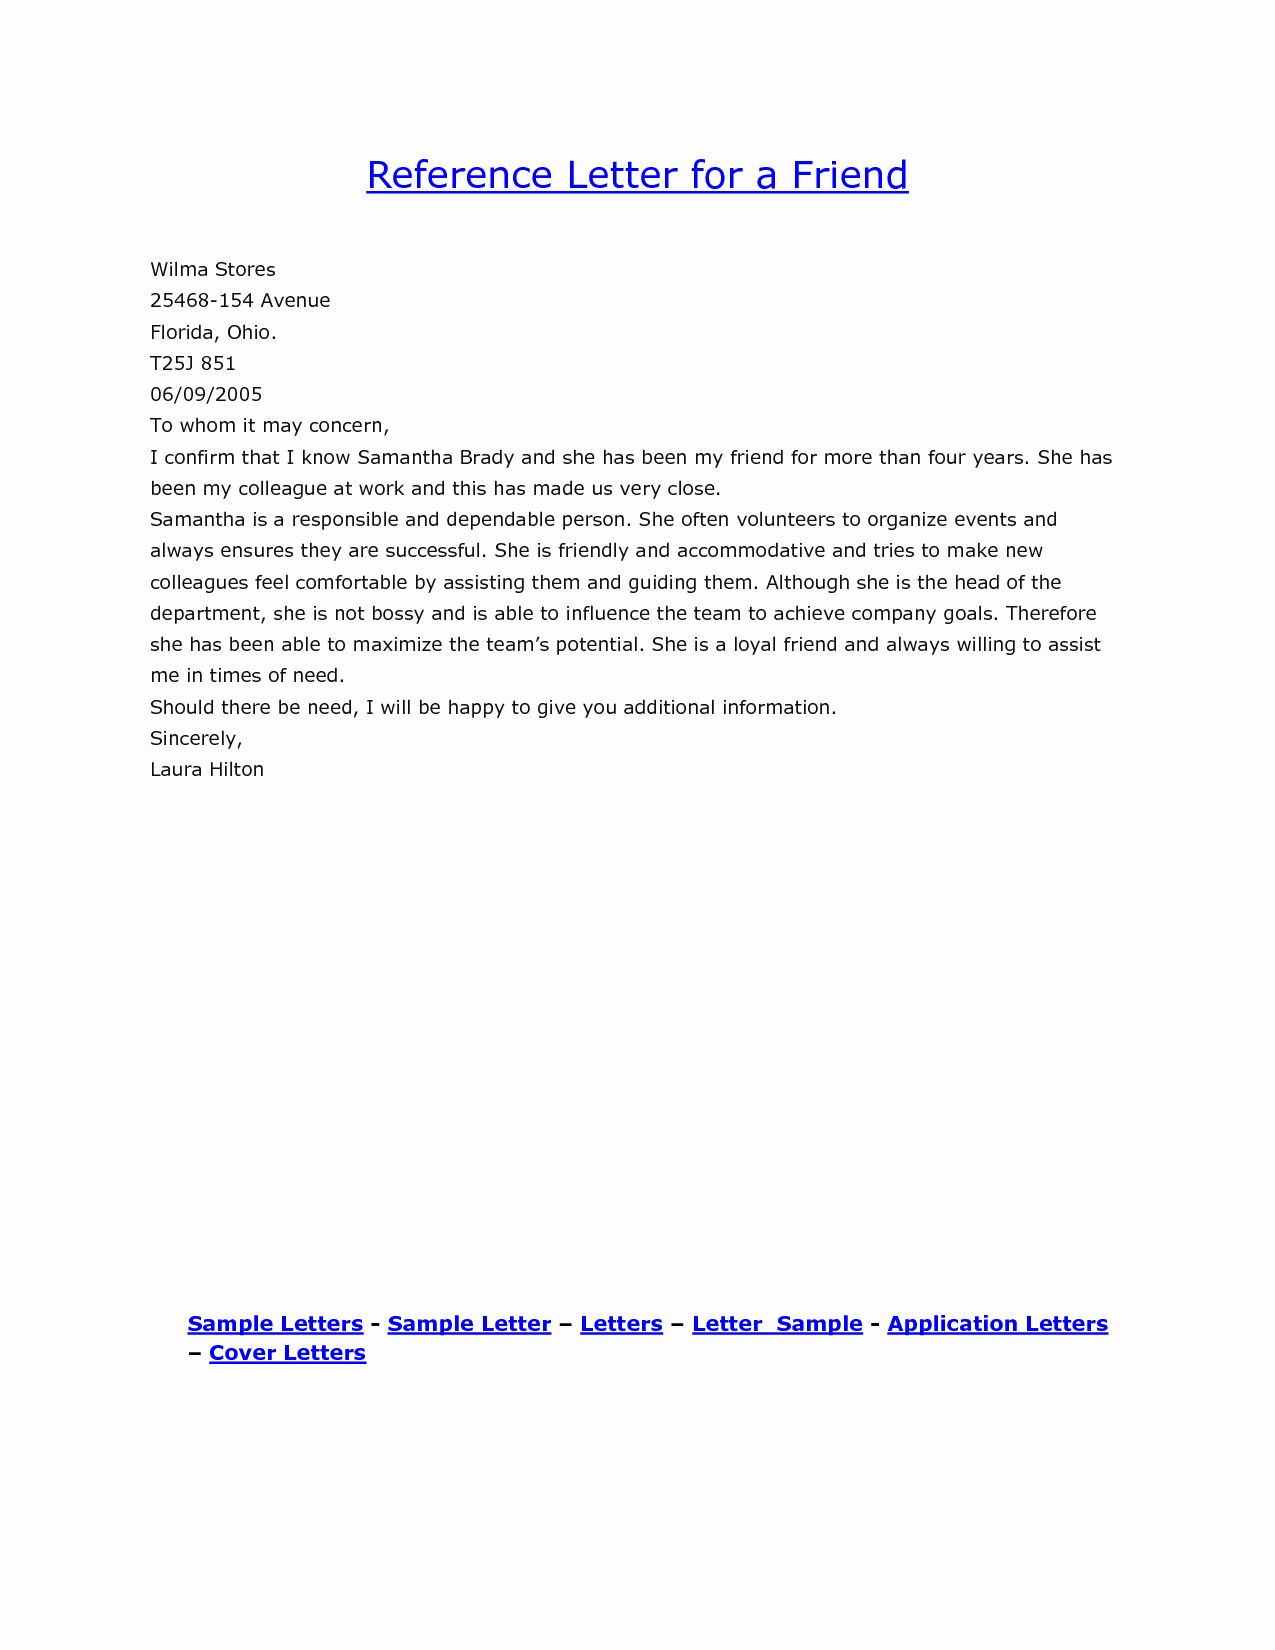 Personal Letter Of Recommendation Template Inspirational Personal Reference Letter for A Friend